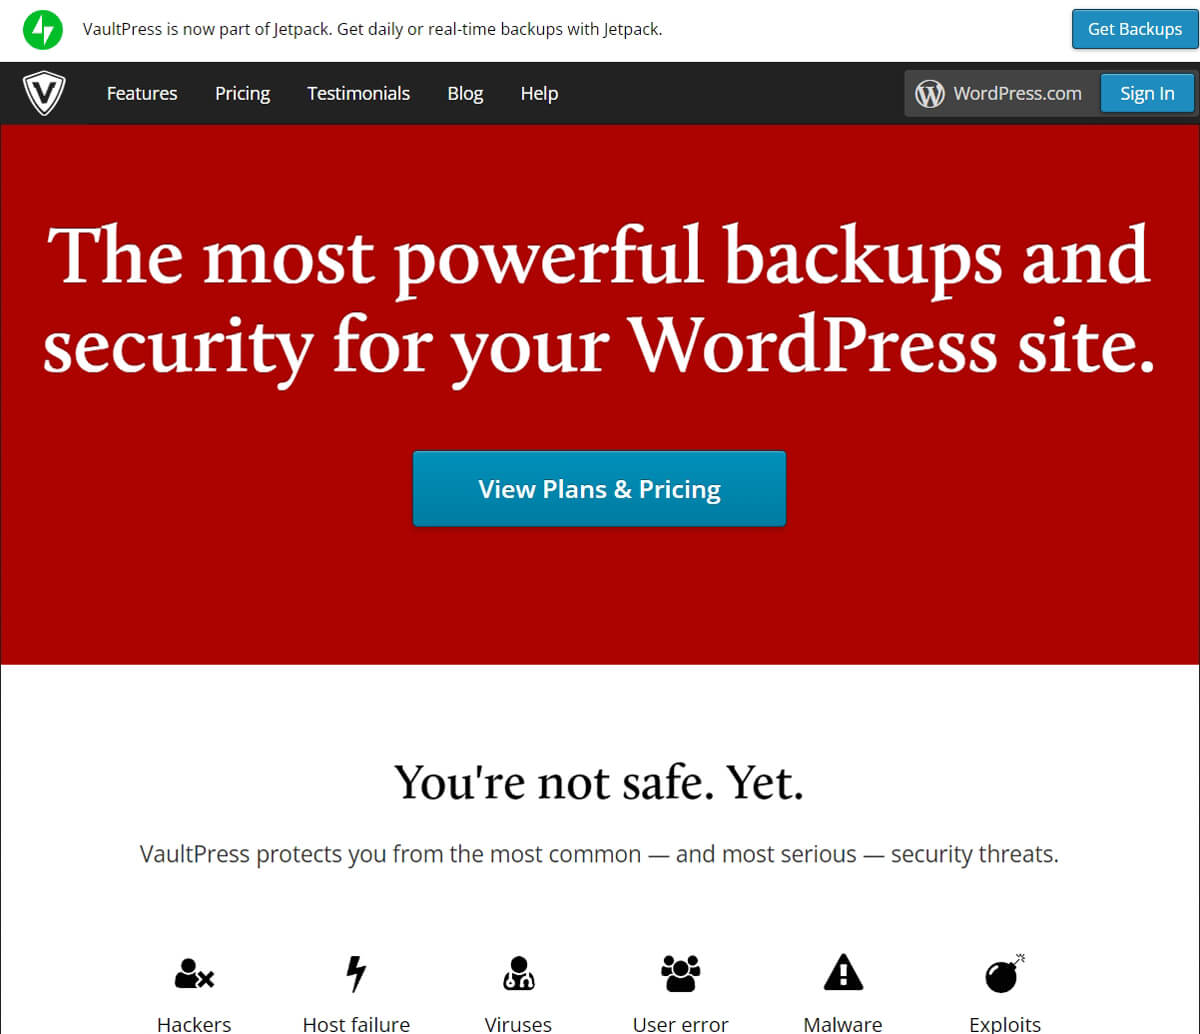 The most powerful backups and security for your WordPress site.